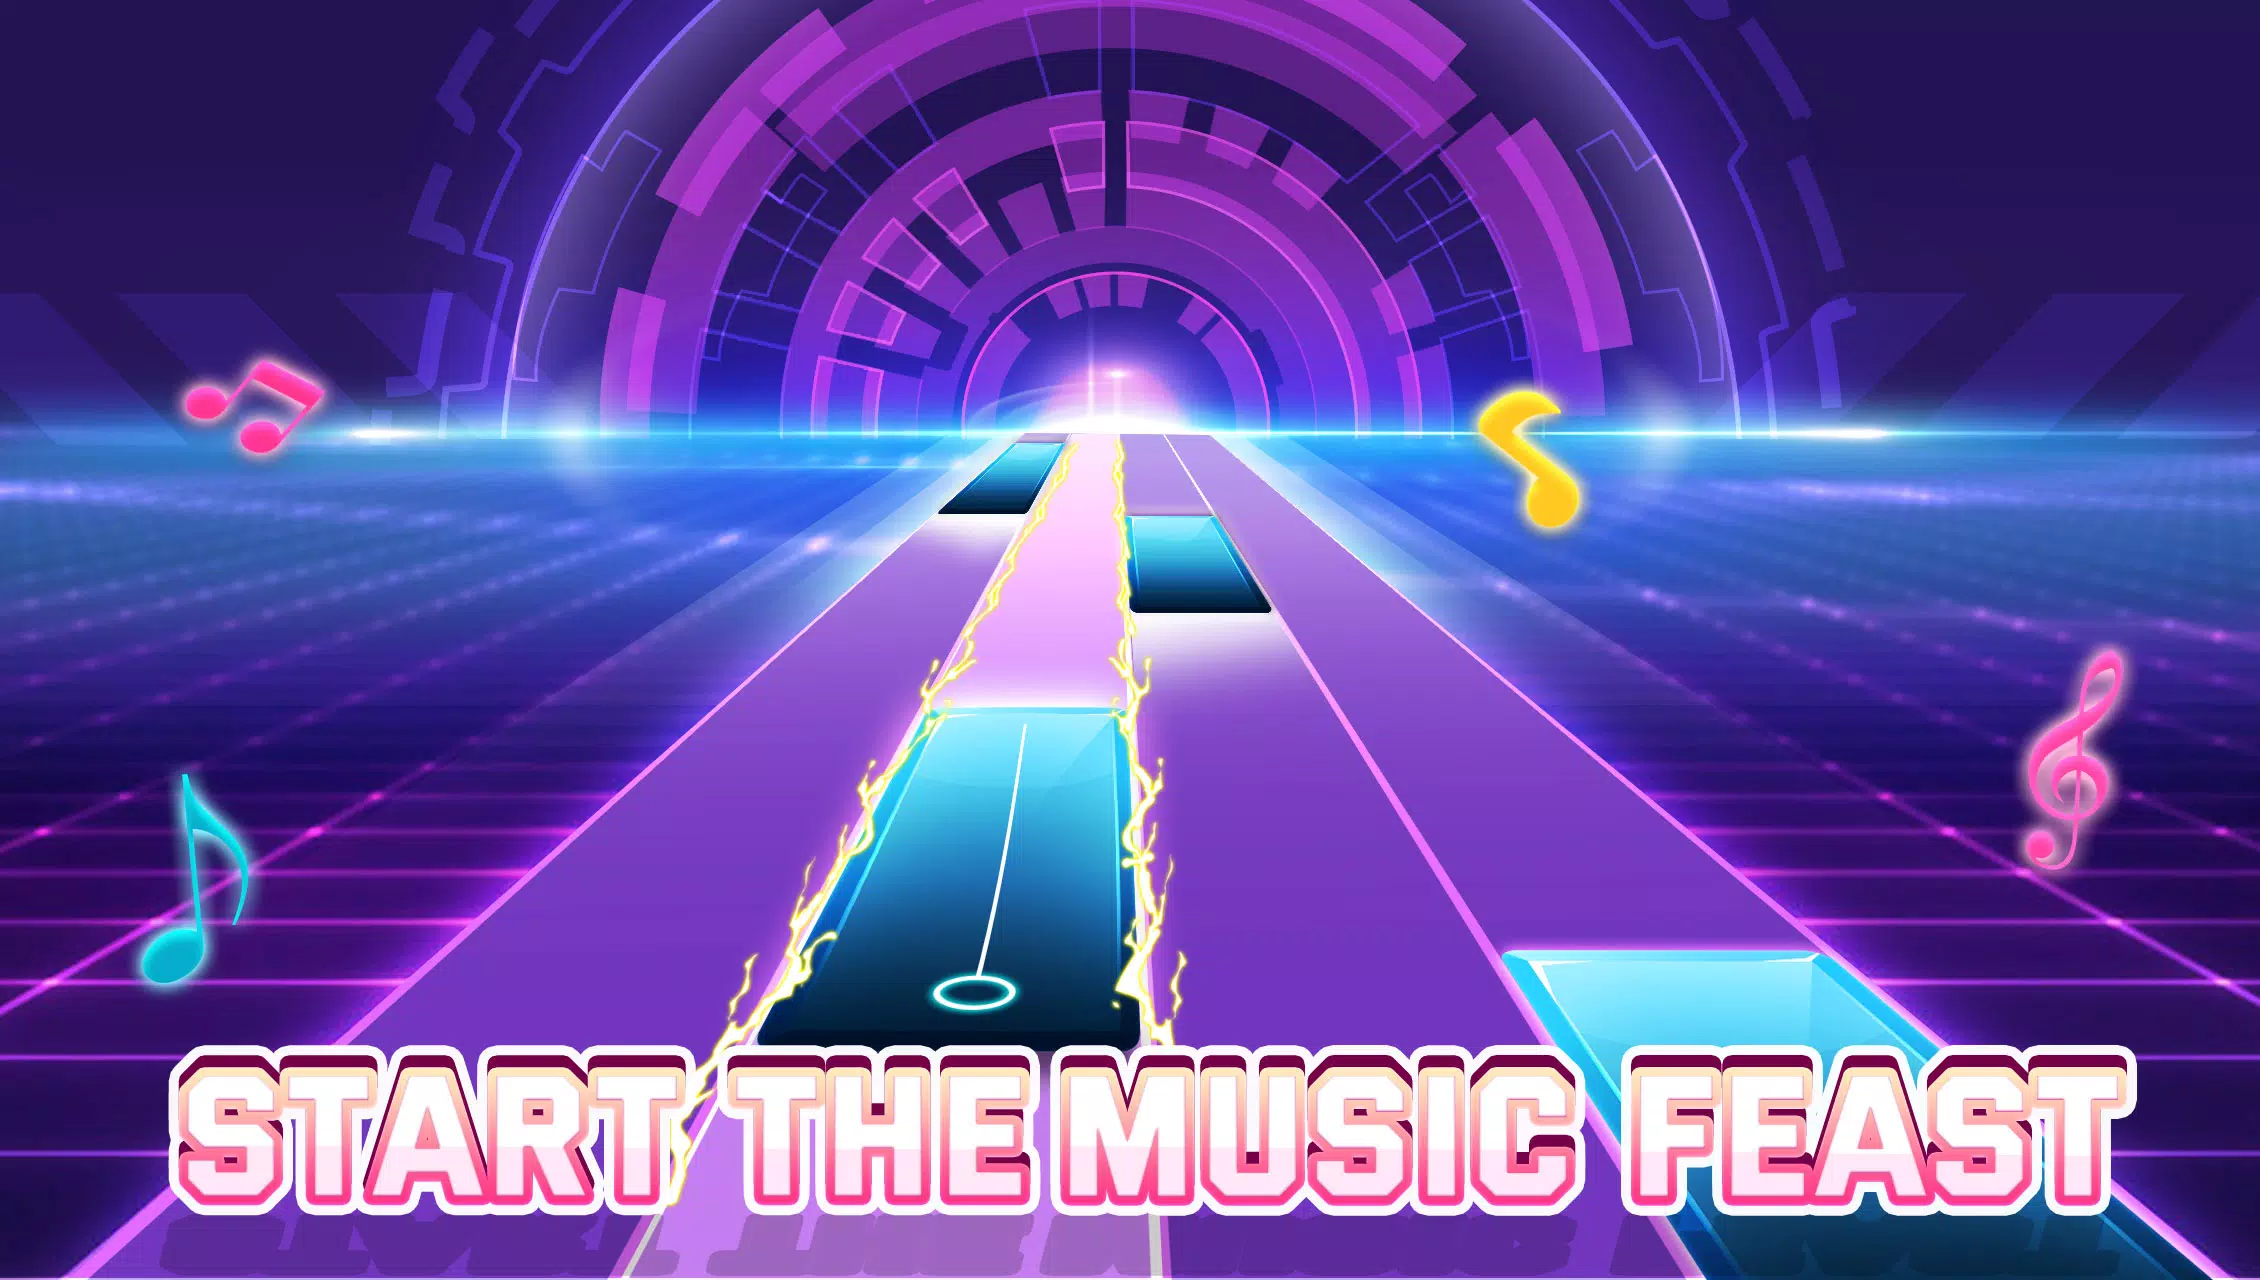 Download Piano Game: Classic Music Song Apk 2.7.20